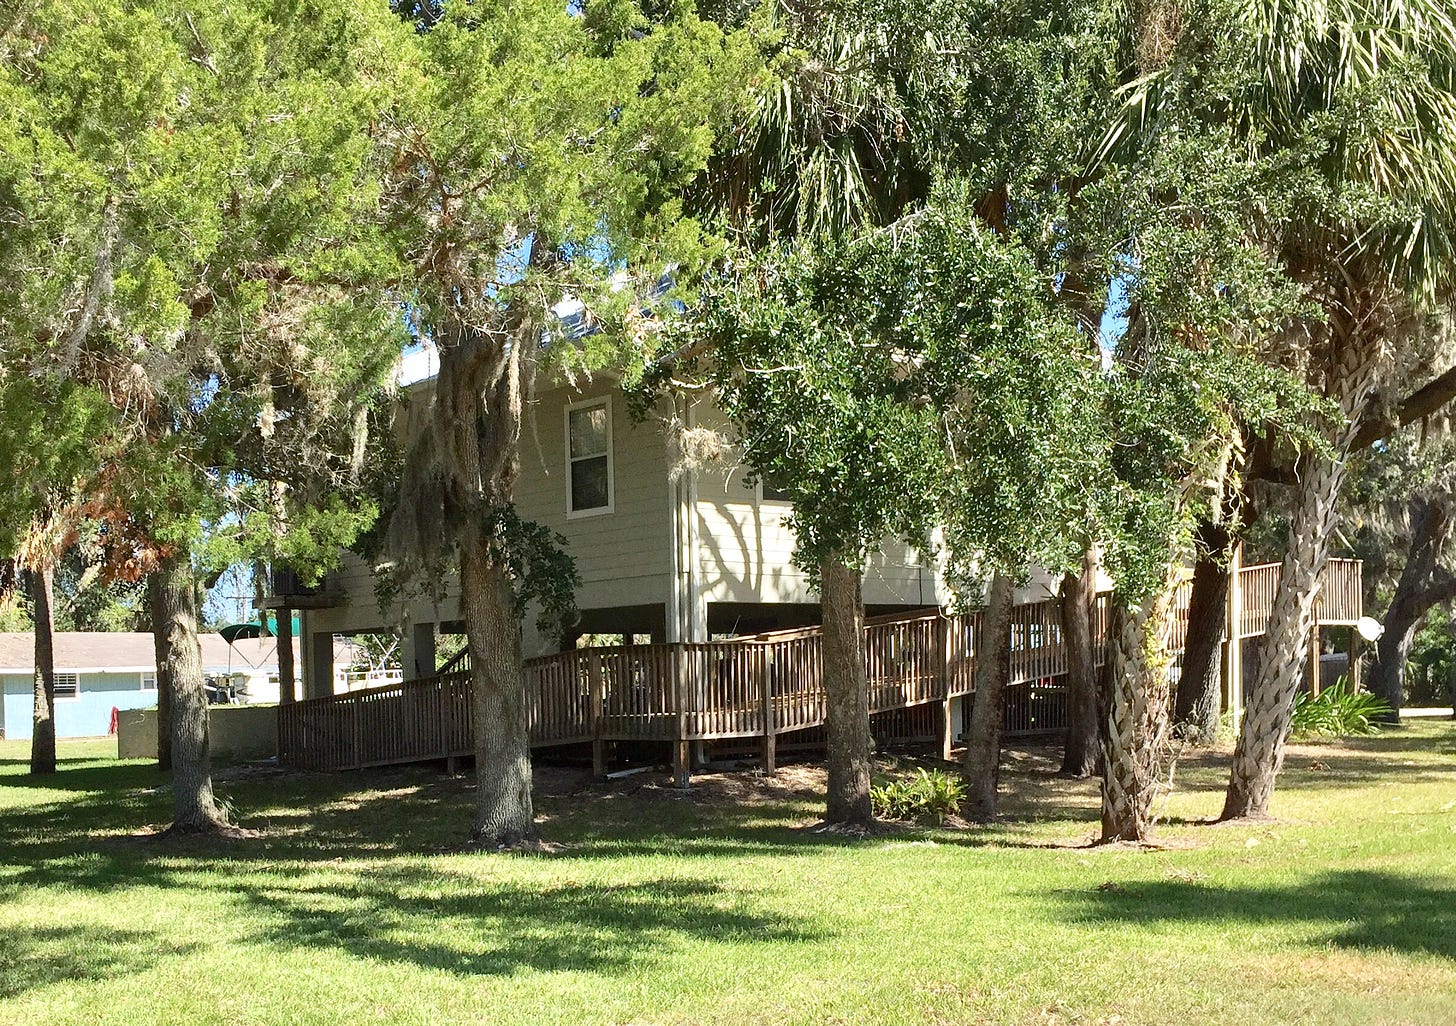 House on stilts with a wrap around ramp. Surrounded by oak trees with Spanish Moss